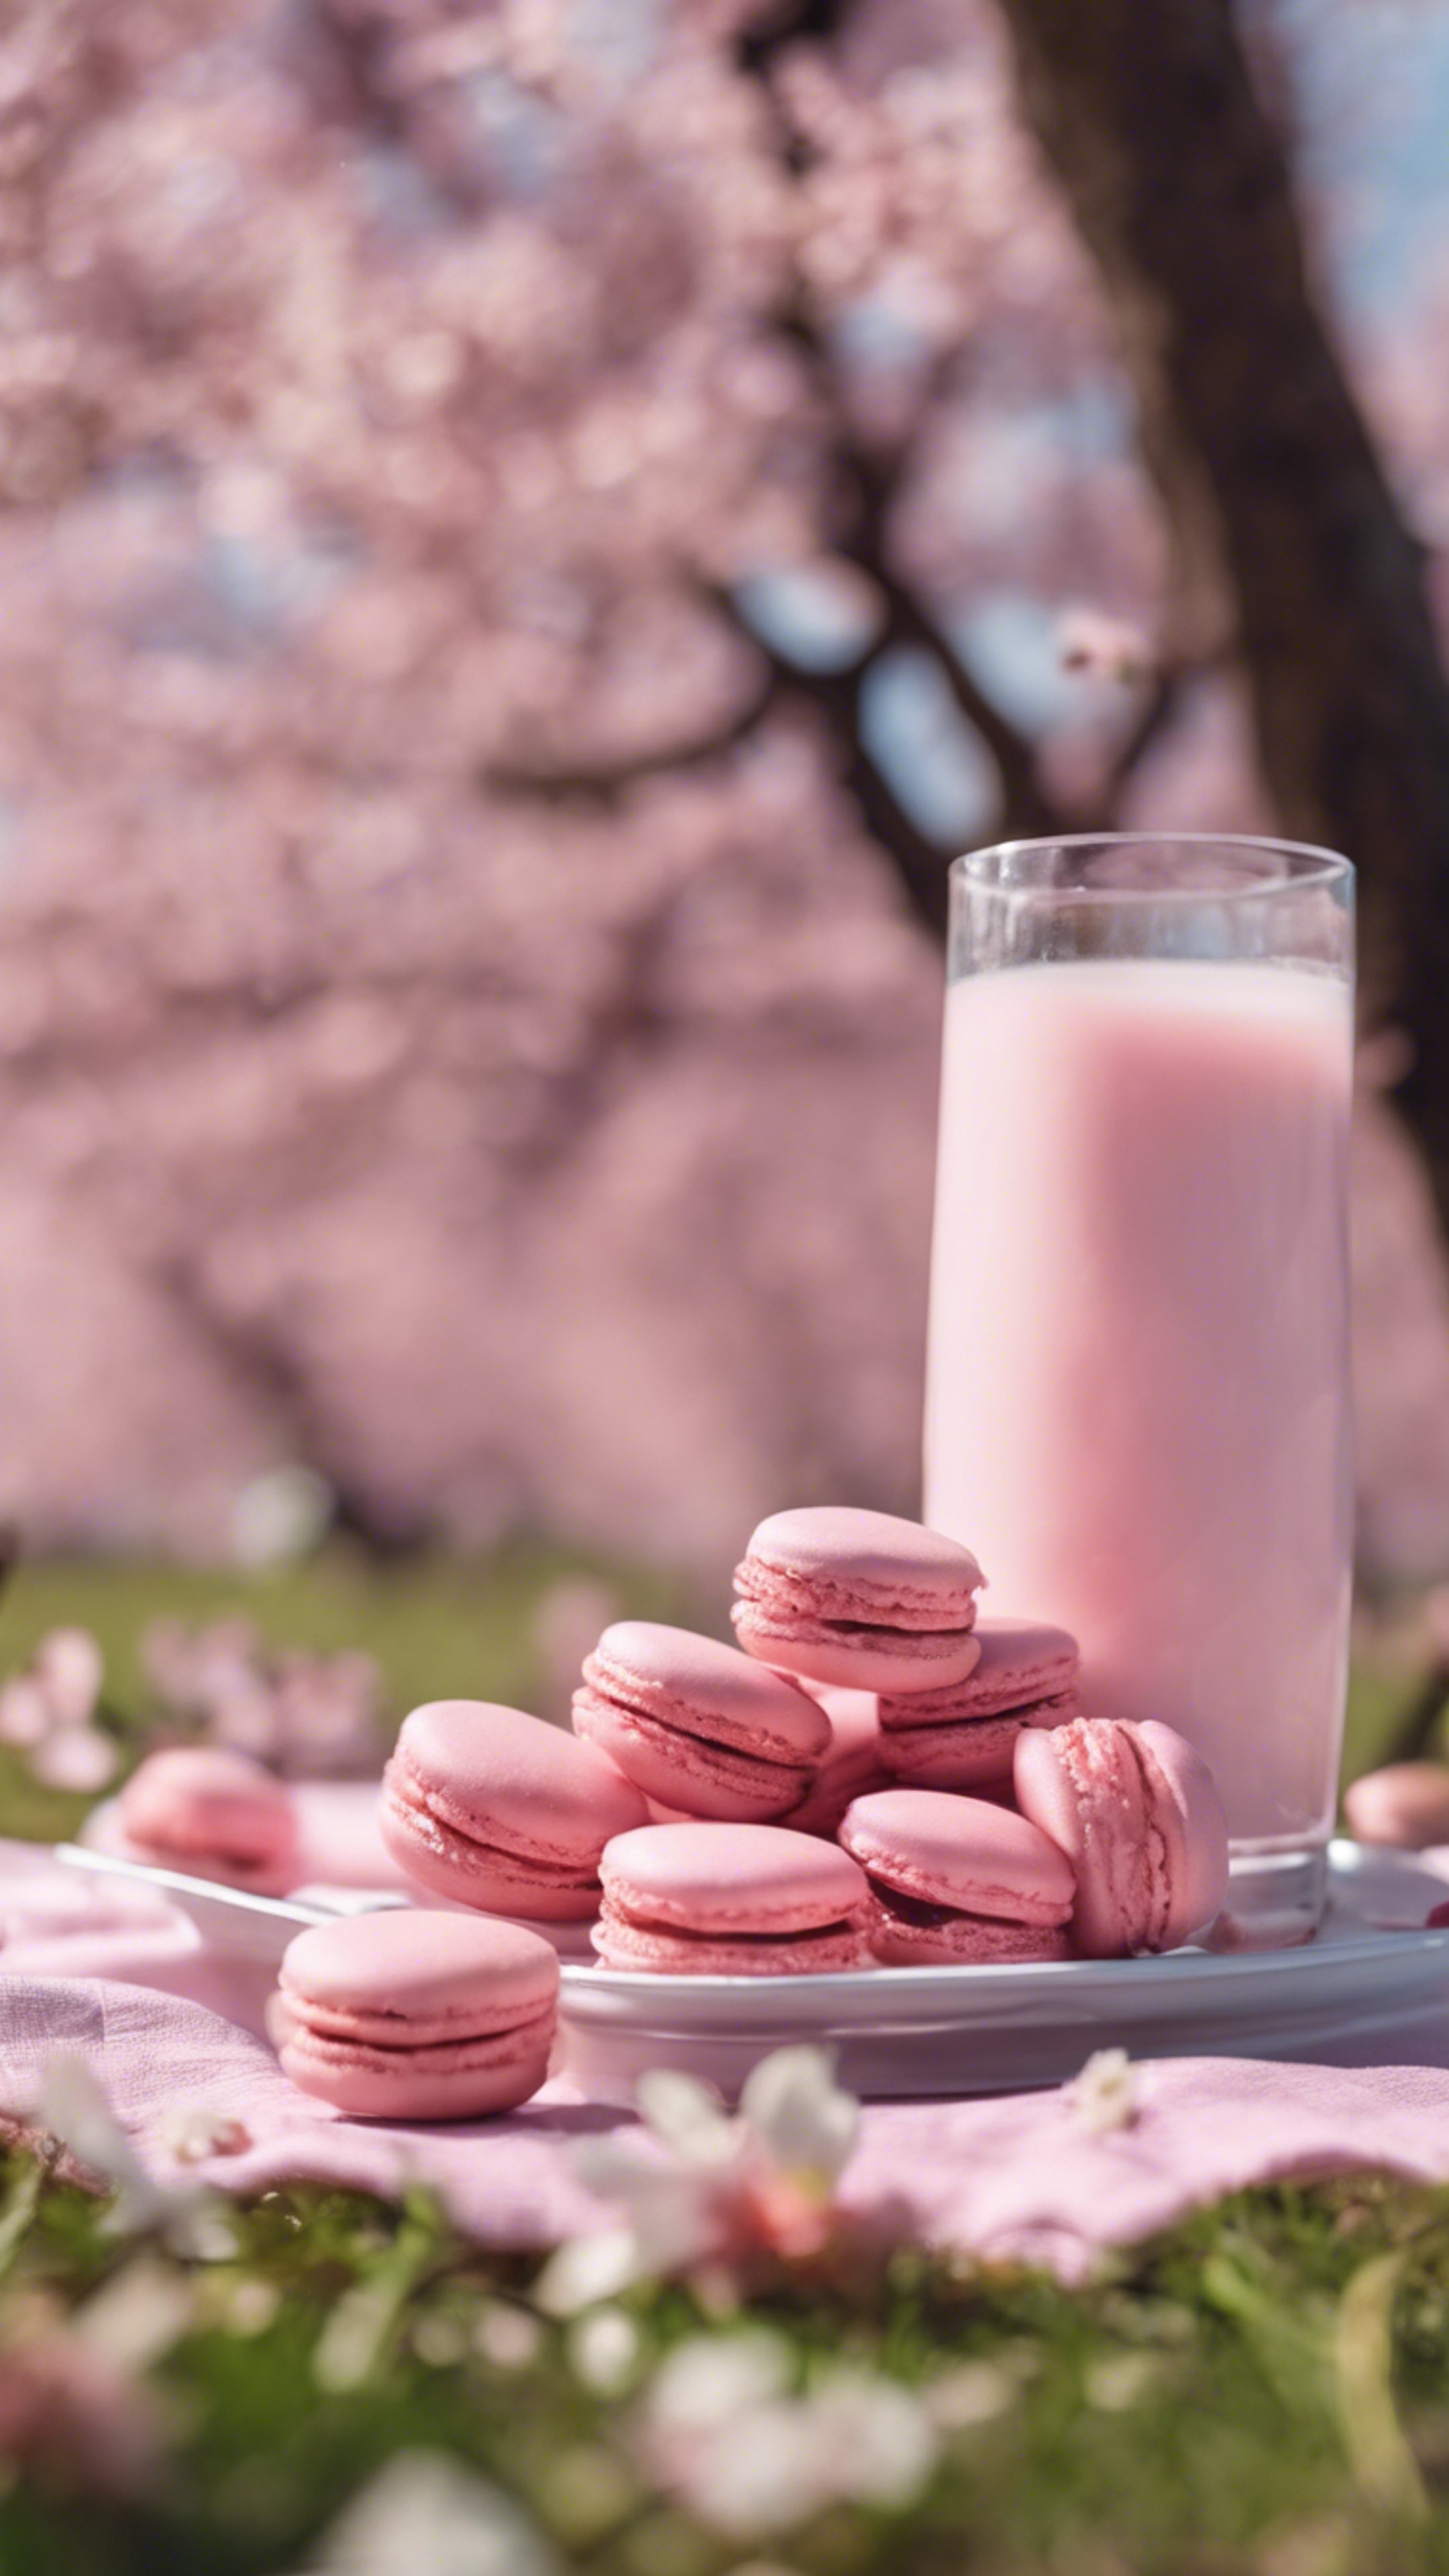 A picnic under the cherry blossoms with pink macaroons and strawberry milk. Wallpaper[97540e72ef6b46bcbaa8]